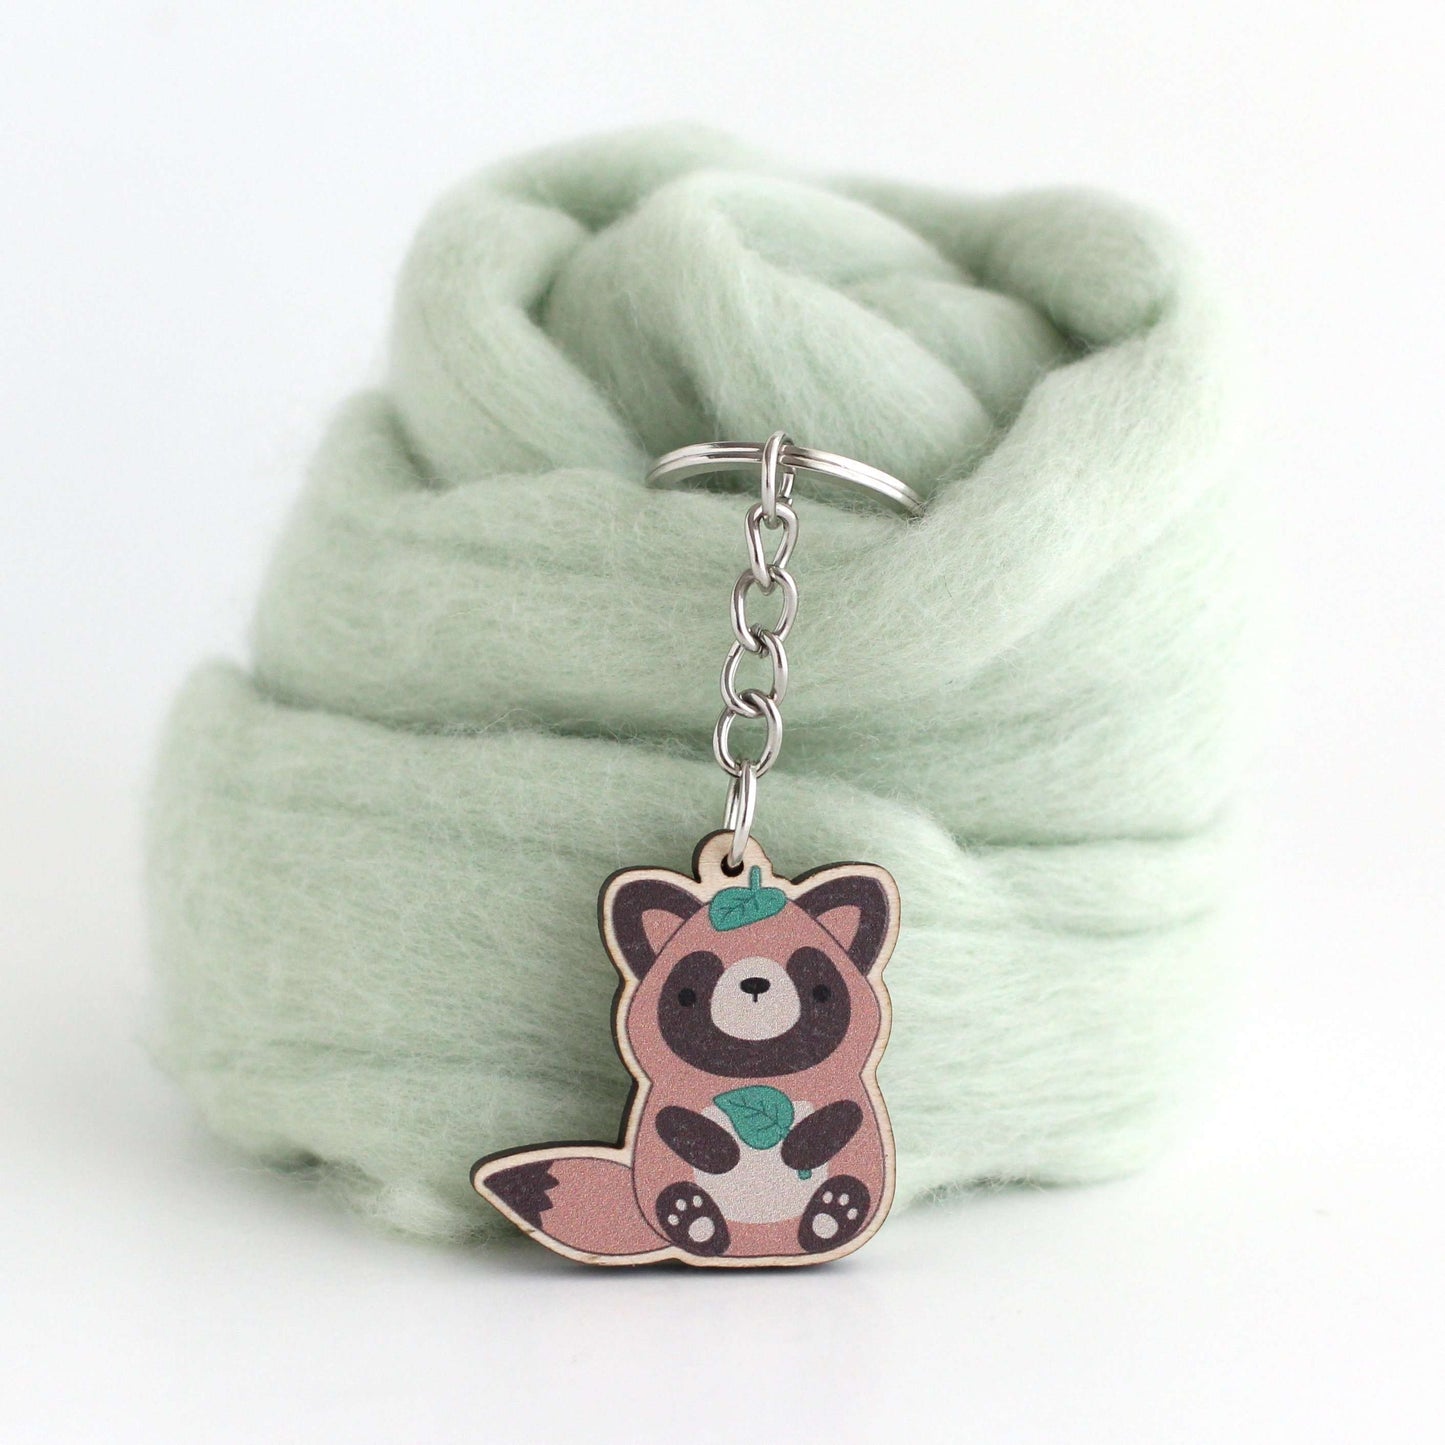 Tanuki Wooden Keychain - Japanese Raccoon Dog - Sustainable Gift by Wild Whimsy Woolies